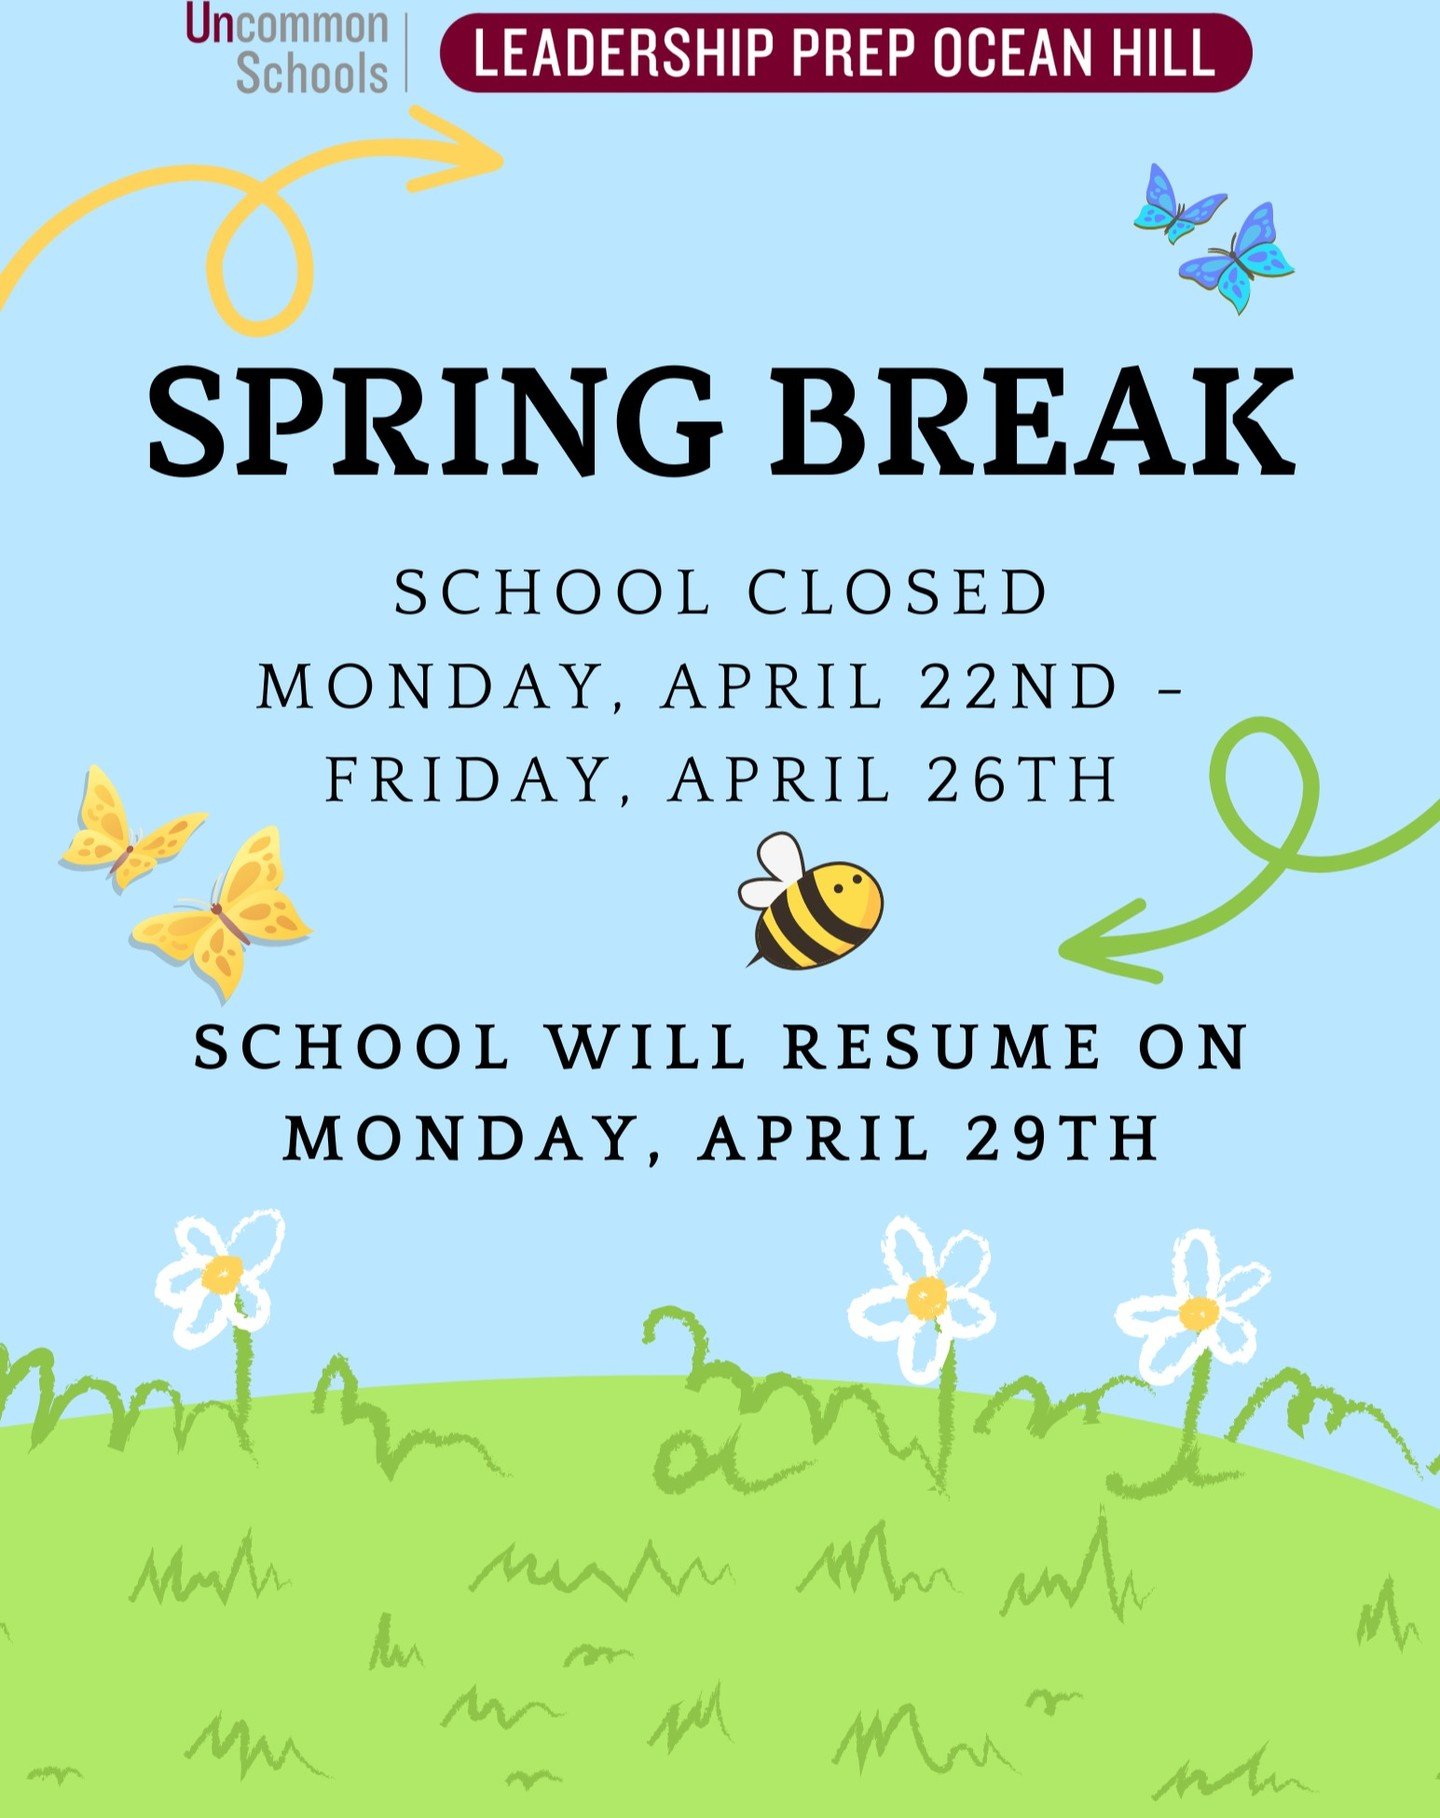 School will be closed from Monday, April 22nd through Friday, April 26th for our much-anticipated Spring Break. This is a wonderful time for students and families to relax, recharge, and enjoy some well-deserved time off.

Classes will resume as usua